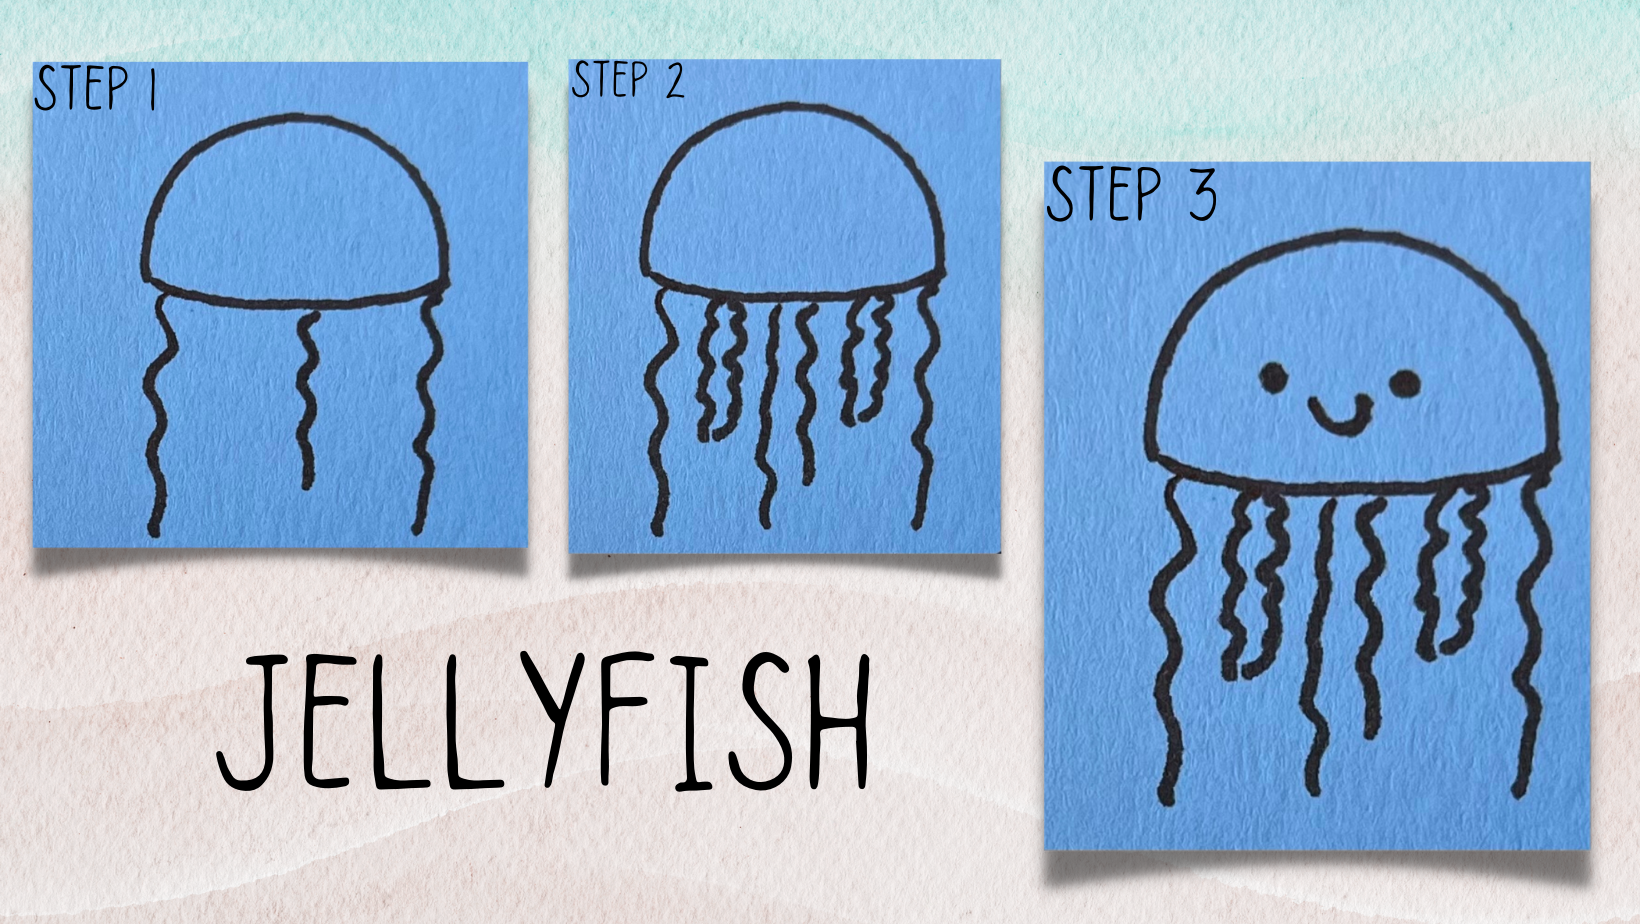 Pictures of how to draw a kawaii jellyfish.